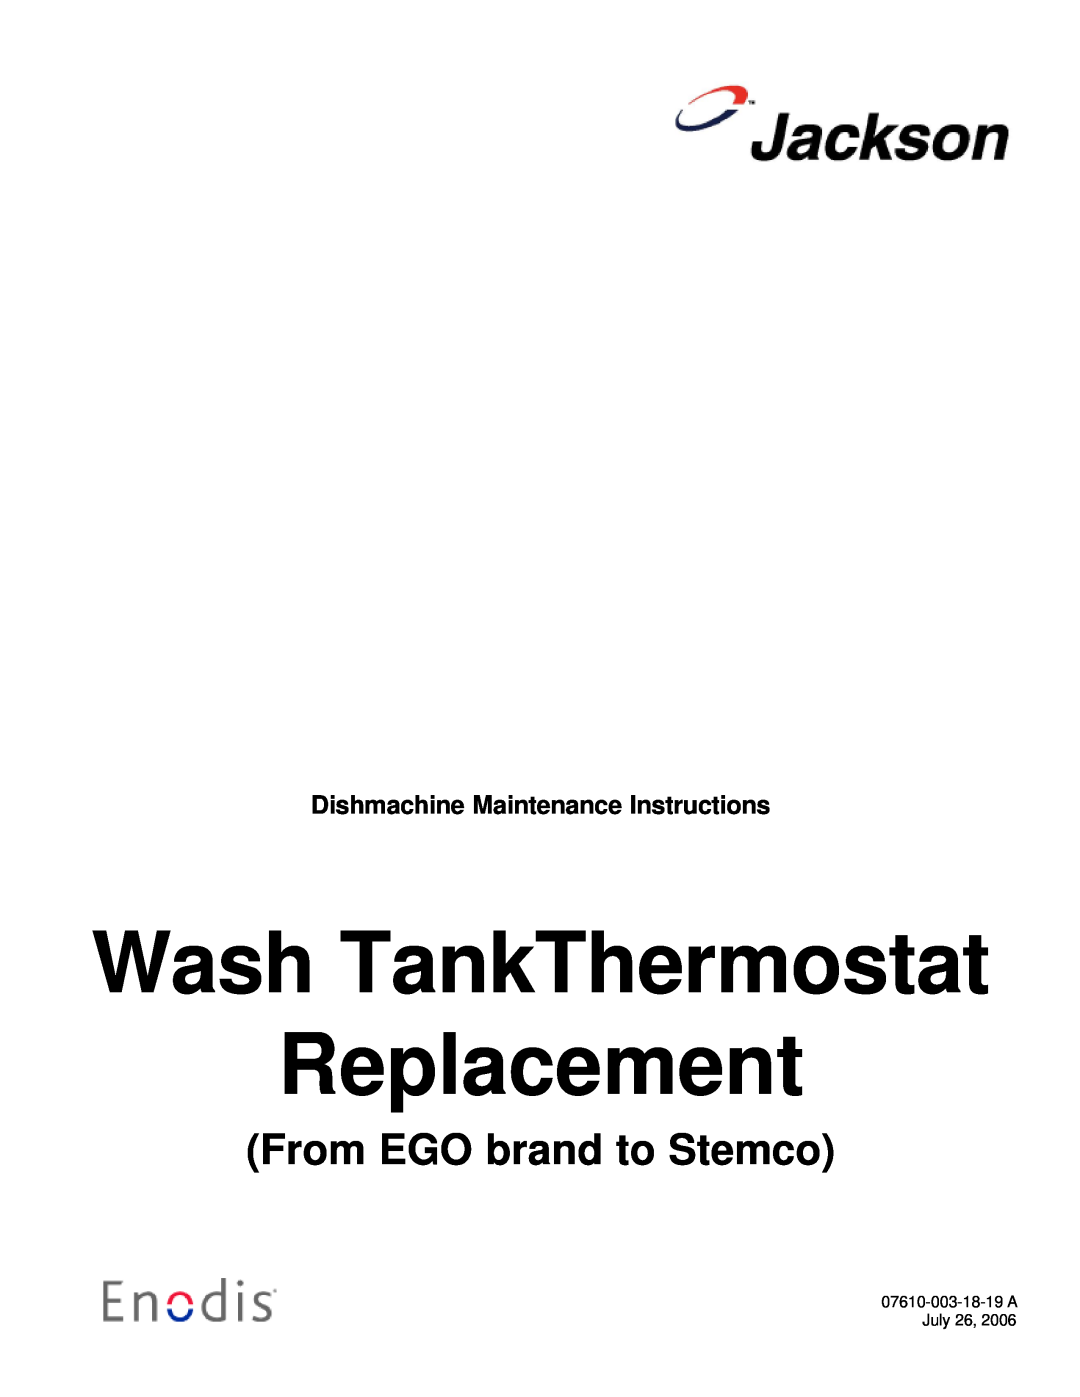 Jackson wash tank thermostat replacement manual Wash TankThermostat Replacement, From EGO brand to Stemco 